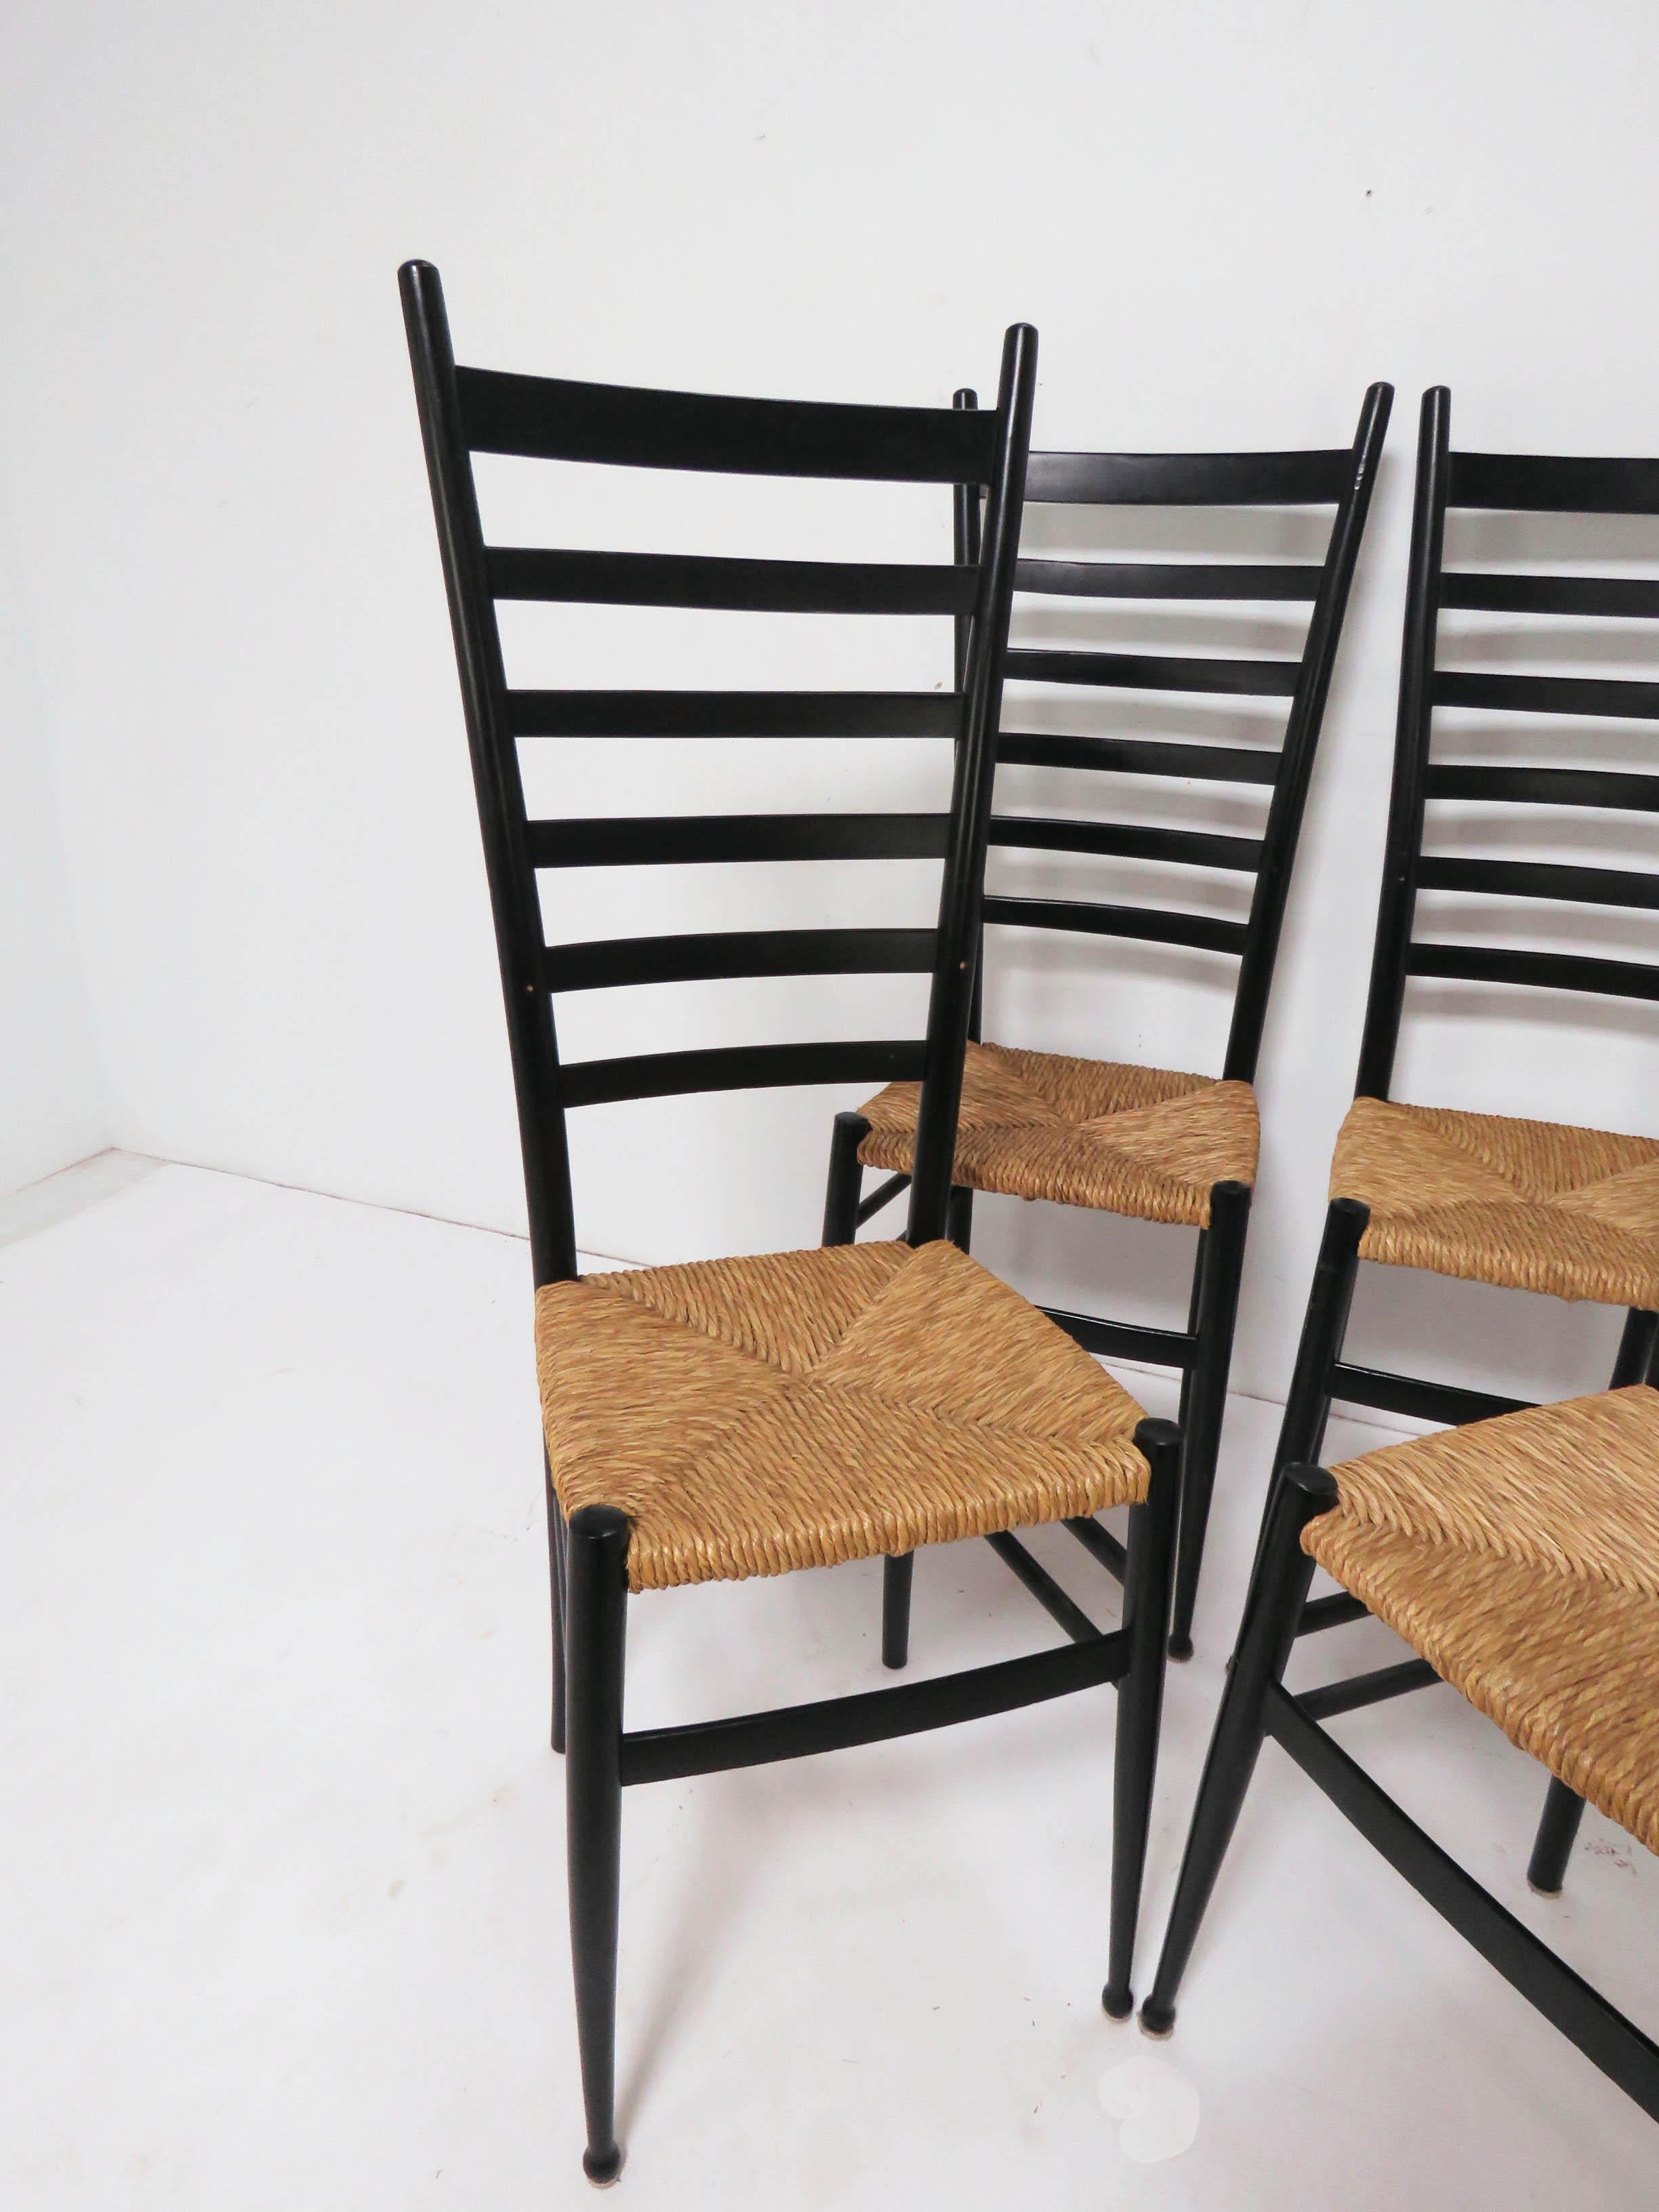 Set of Italian ladder back dining chairs in lacquered wood with woven rush seats in the manner of Gio Ponti, imported in the 1960s from the Chiavari region by Otto Gerdau.